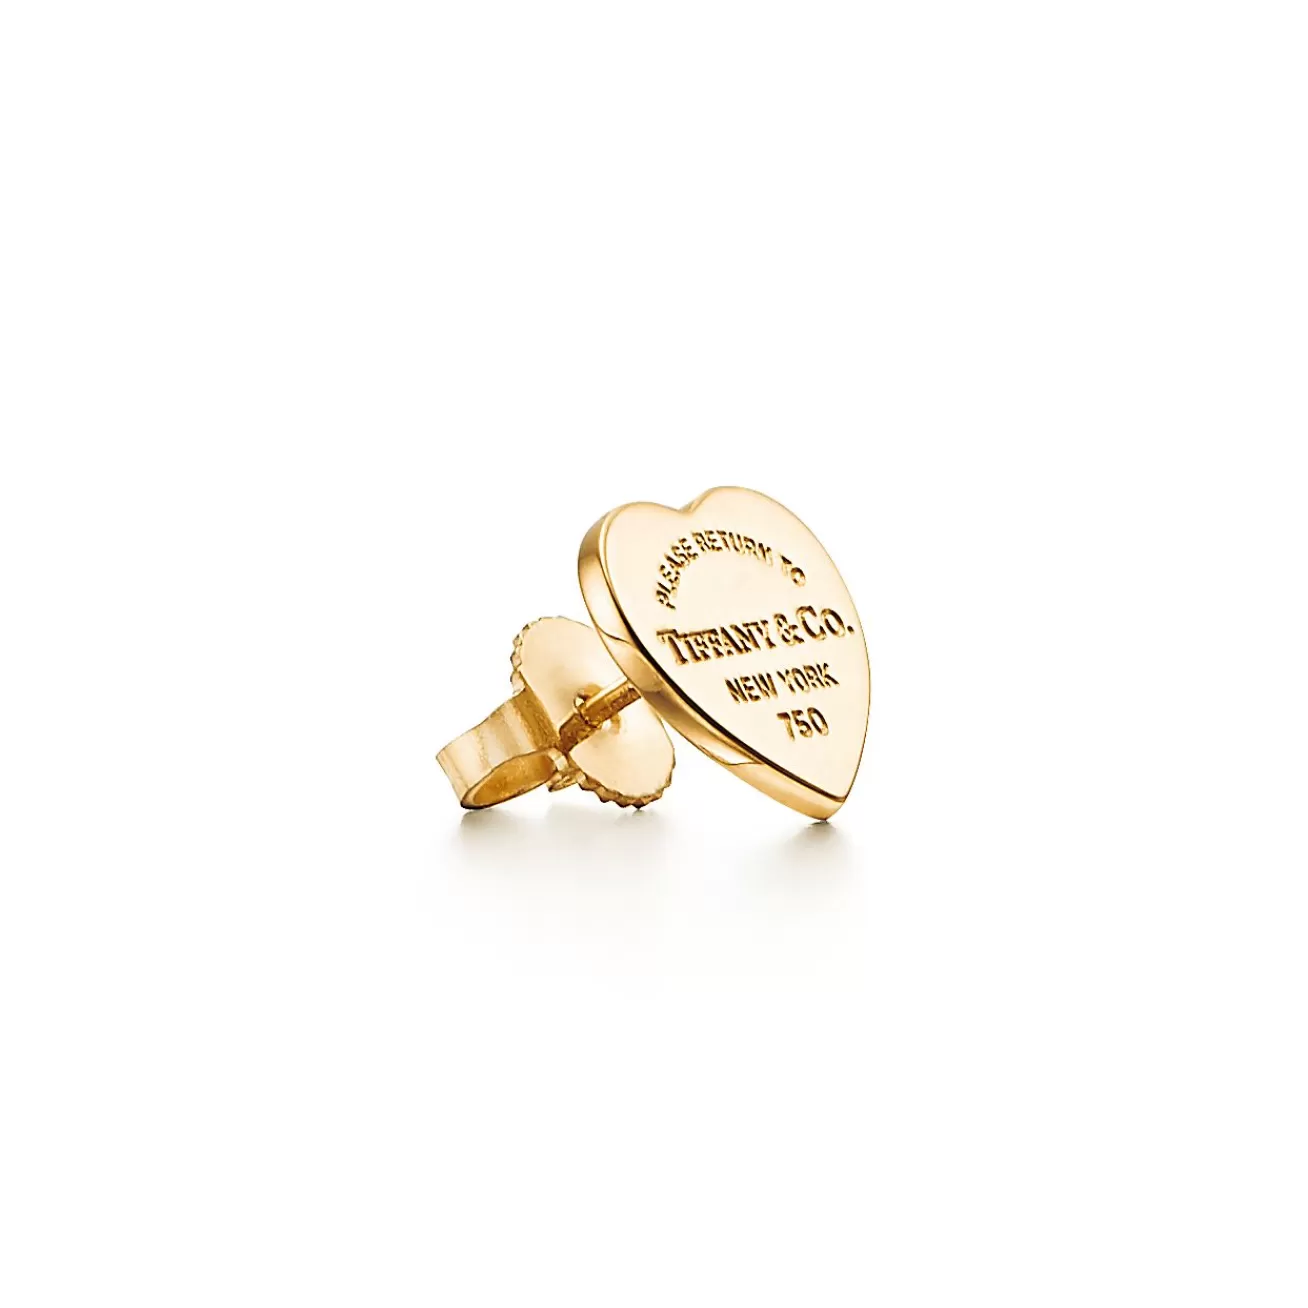 Tiffany & Co. Return to Tiffany® Heart Tag Stud Earrings in Yellow Gold, Mini | ^ Earrings | Gifts for Her